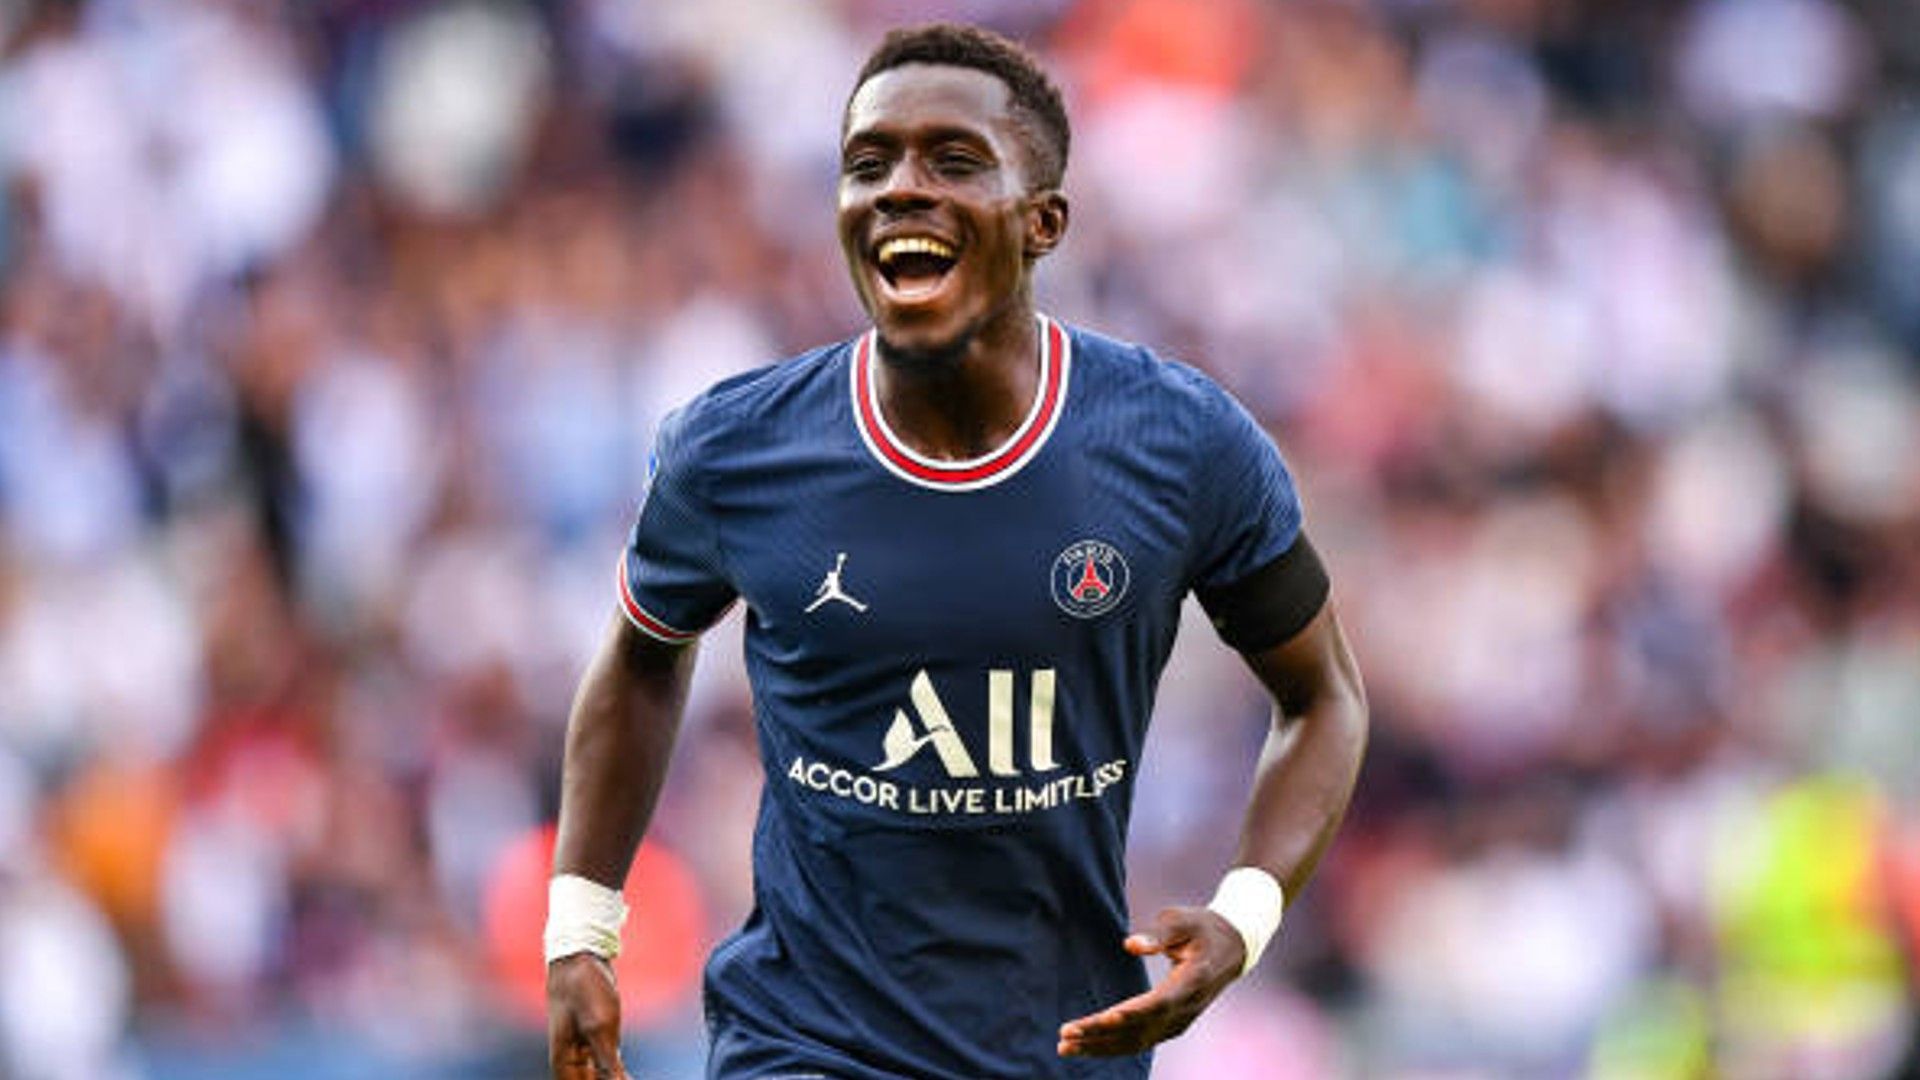 Gueye has been a revelation in midfield for PSG this season.